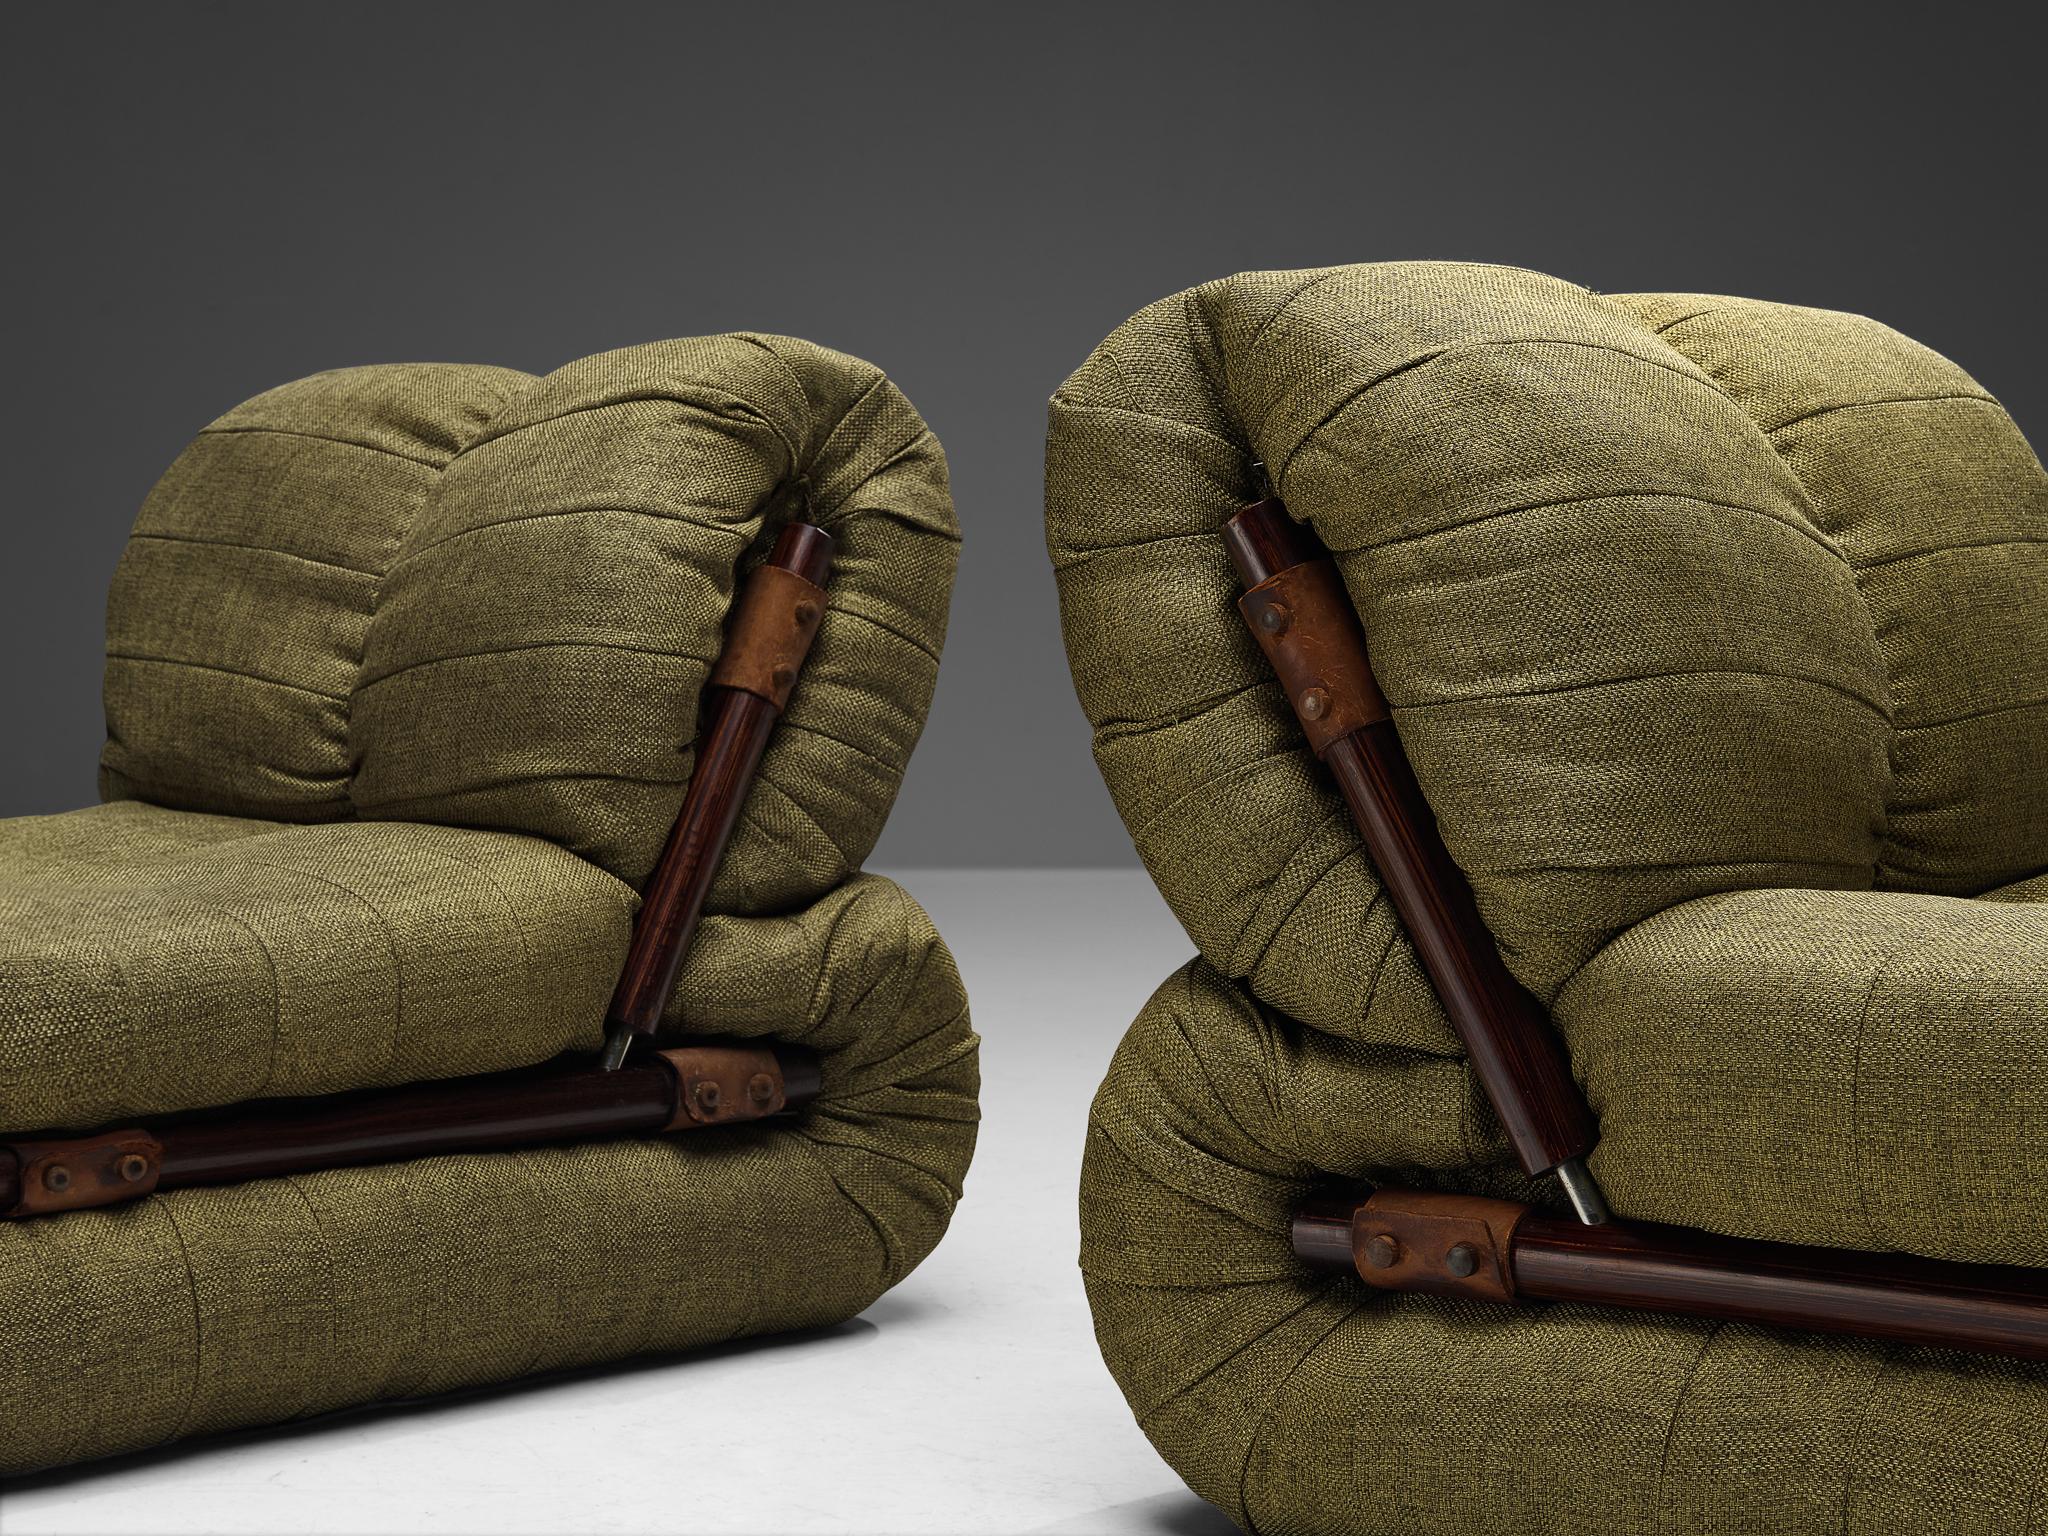 Mid-Century Modern Percival Lafer Lounge Chairs in Khaki Green Upholstery